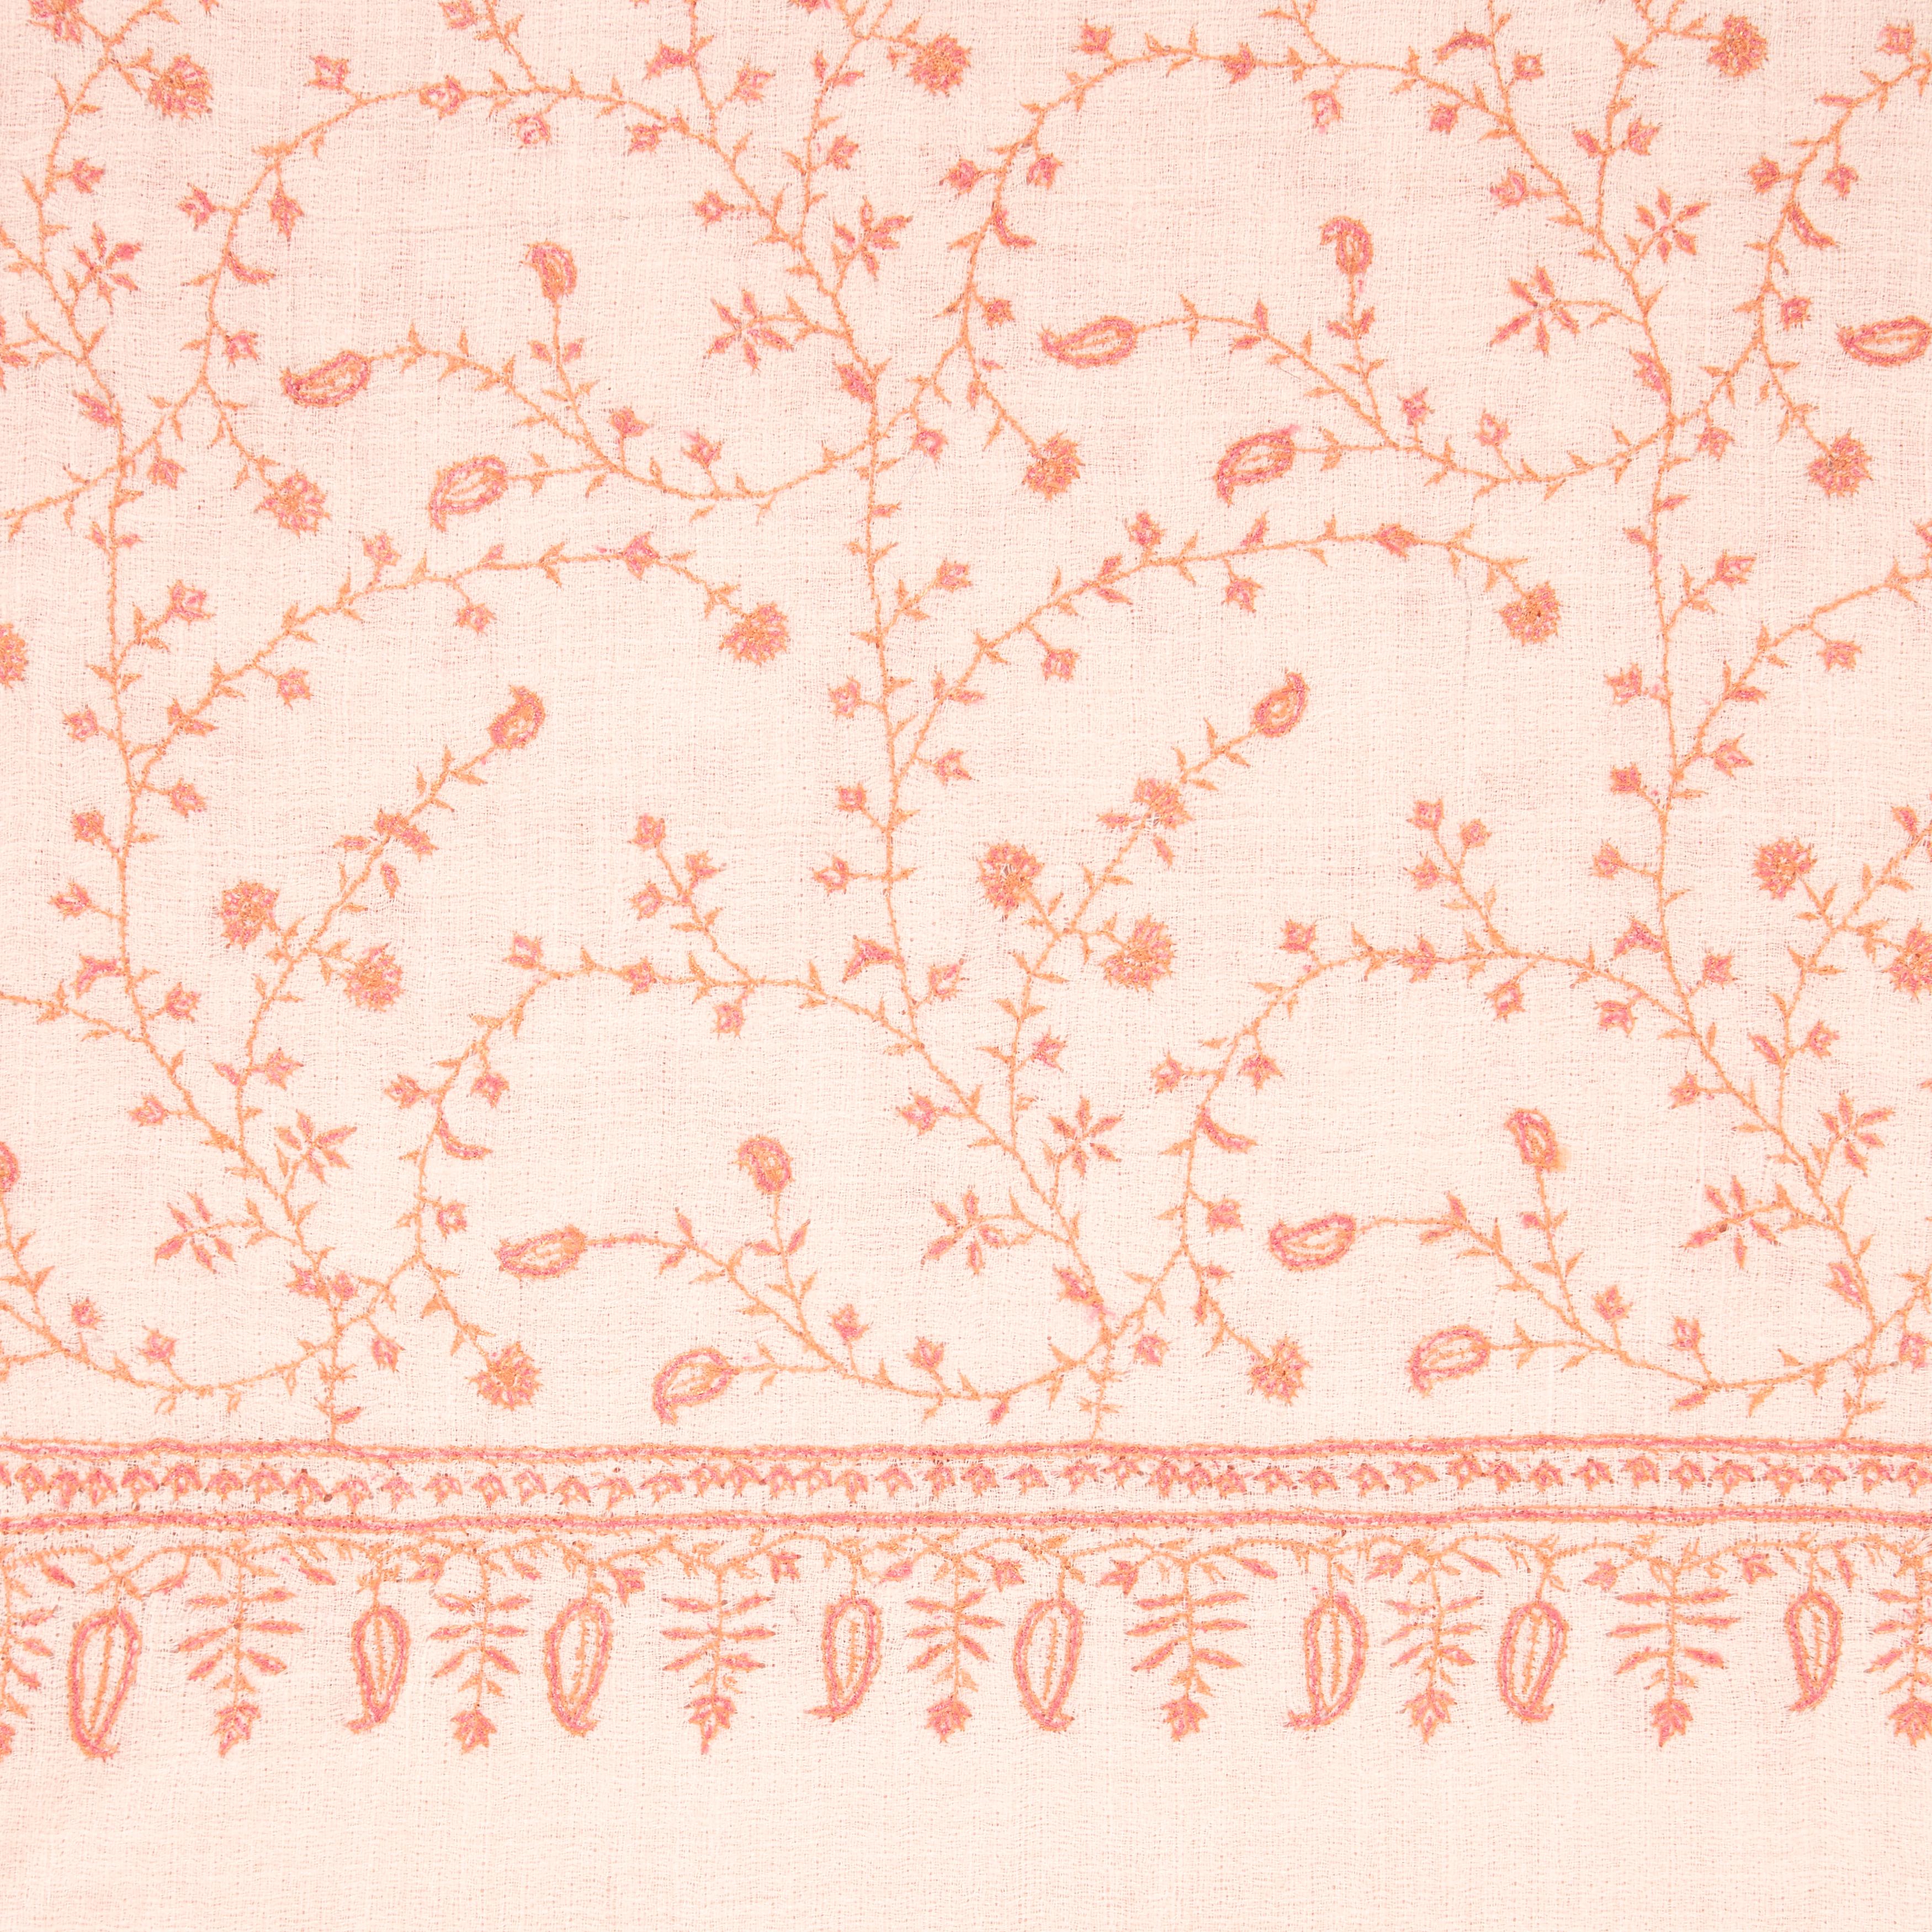 Orange Limited Edition Hand Embroidered Pale Pink 100% Cashmere Shawl made in Kashmir 